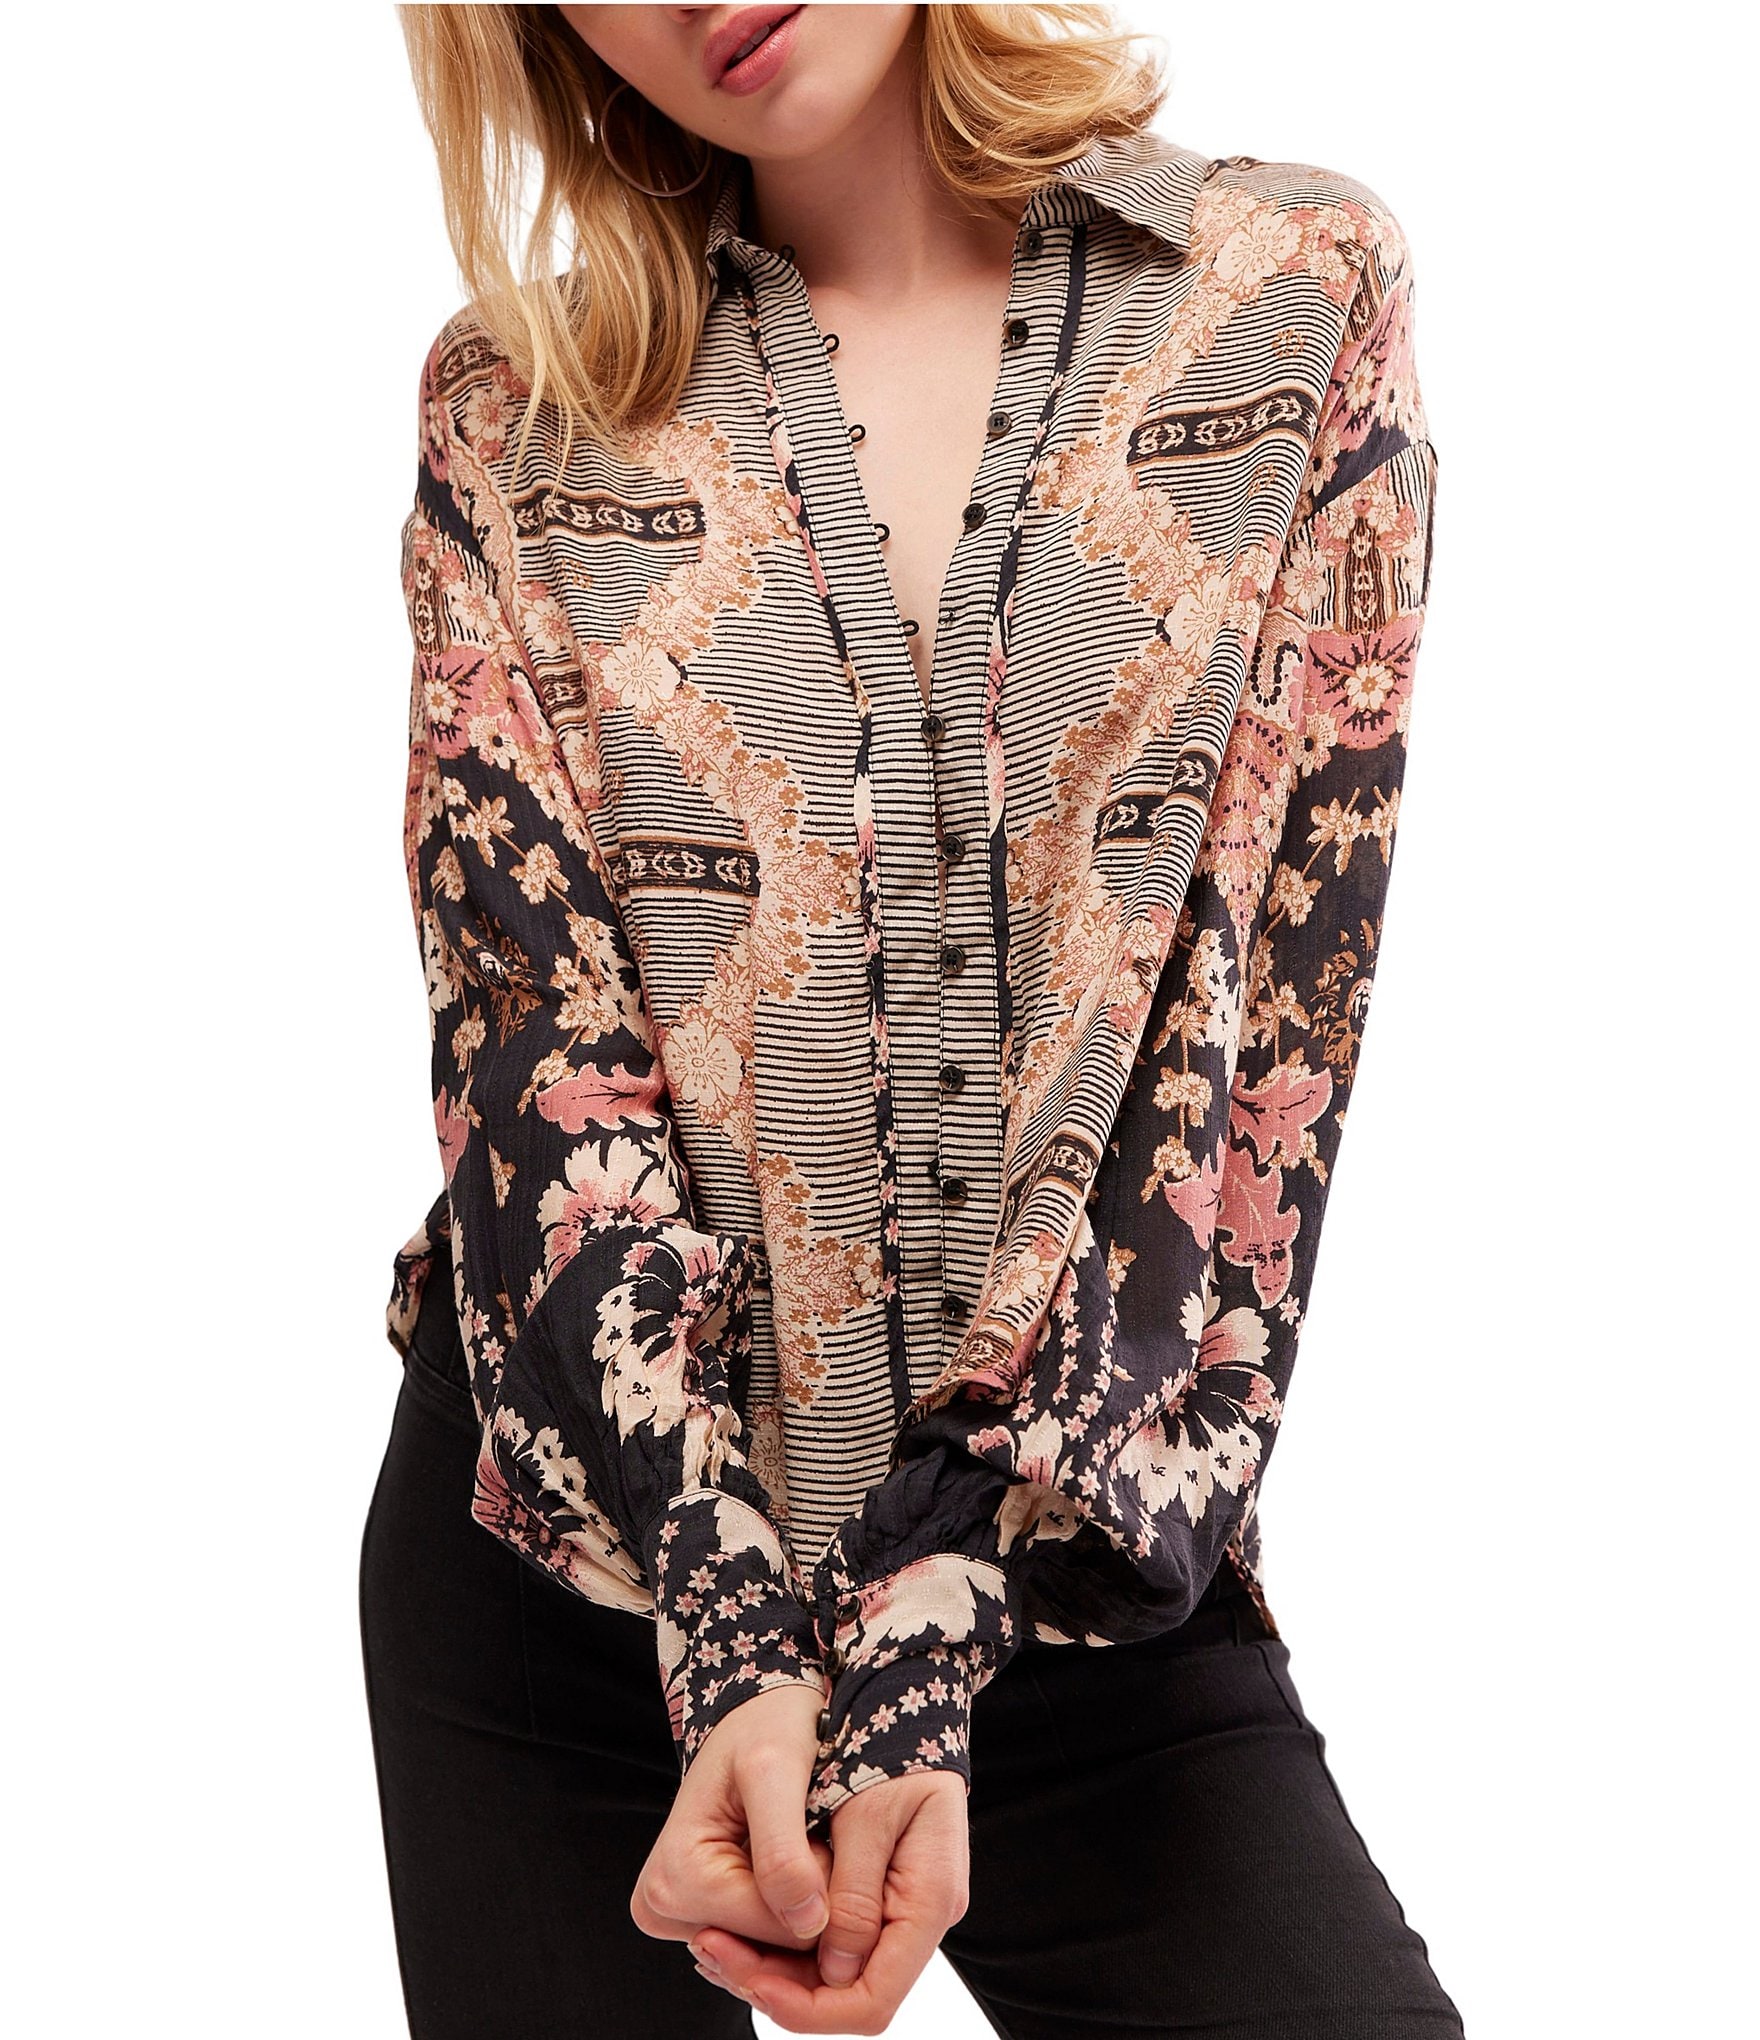 Free People, Tops, Free People Run Free Floral Print Long Sleeve Blouse  Size Small Bust Tie